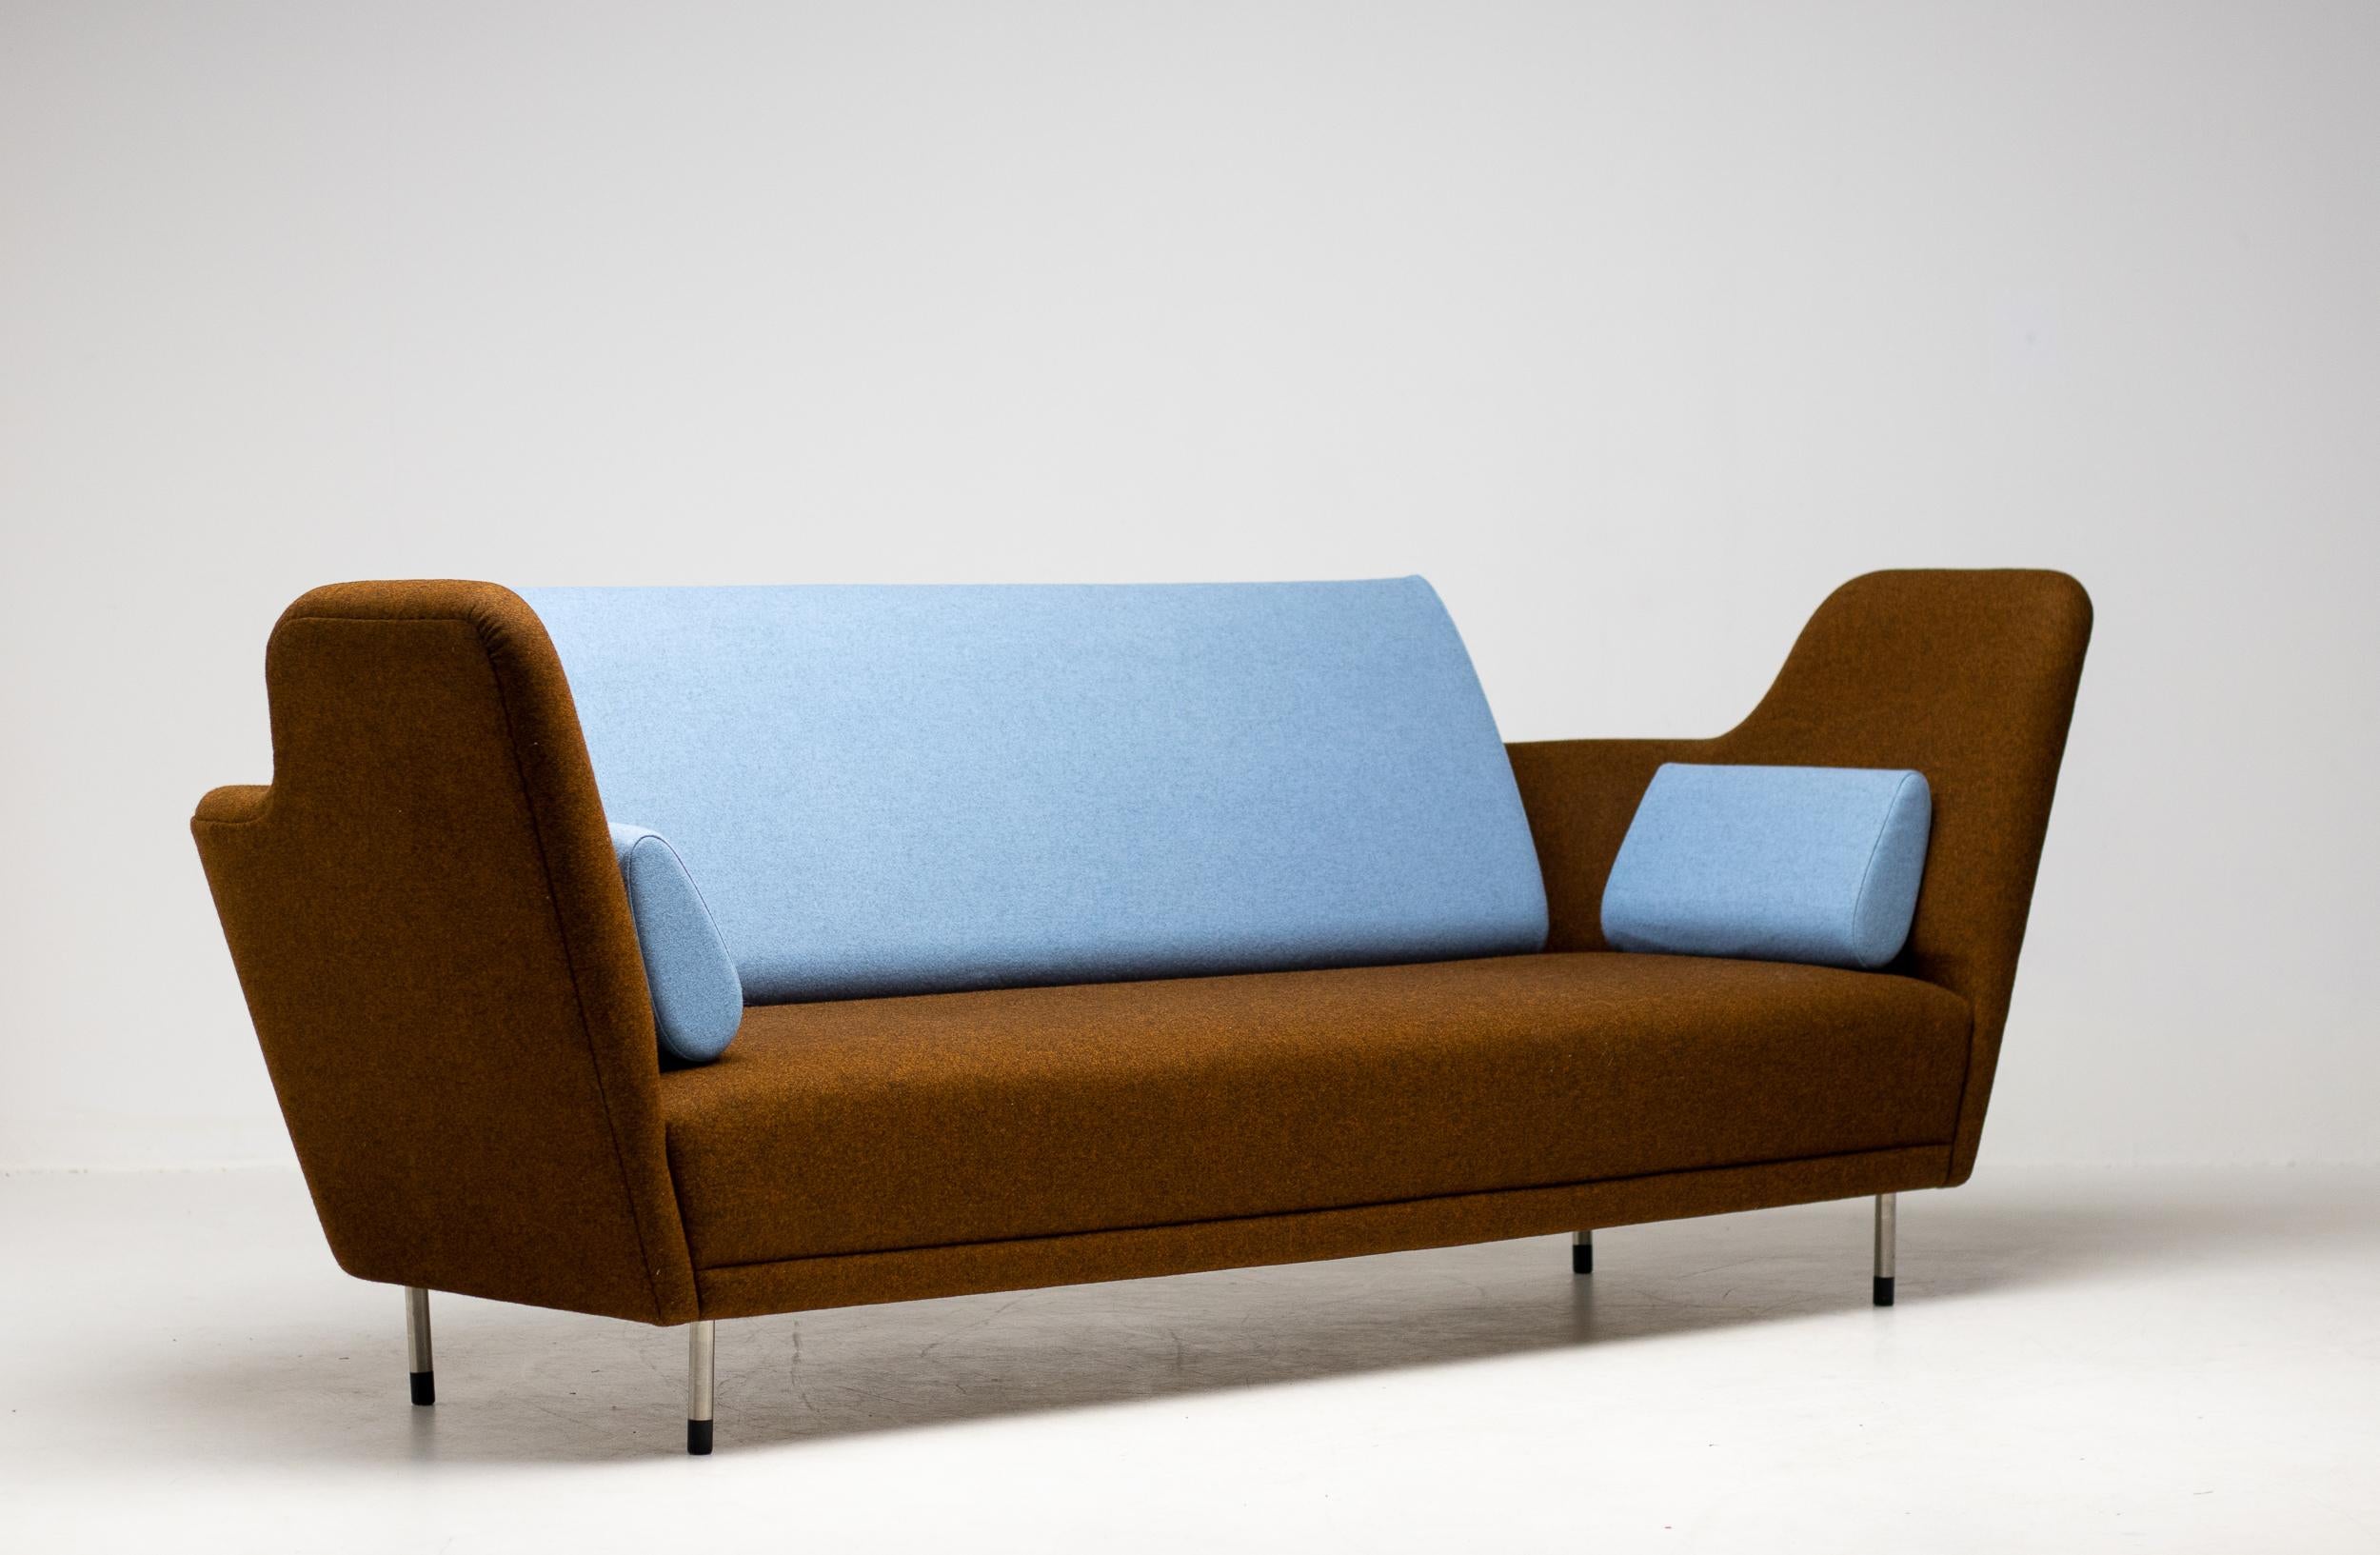 Finn Juhl, sofa model '57', fabric upholstery, steel, teak, leather, Denmark, design 1957.
An extraordinary sofa designed by Finn Juhl. The sofa was exhibited for the very first time in the Tivoli Gardens in Copenhagen during 1957. The extravagant